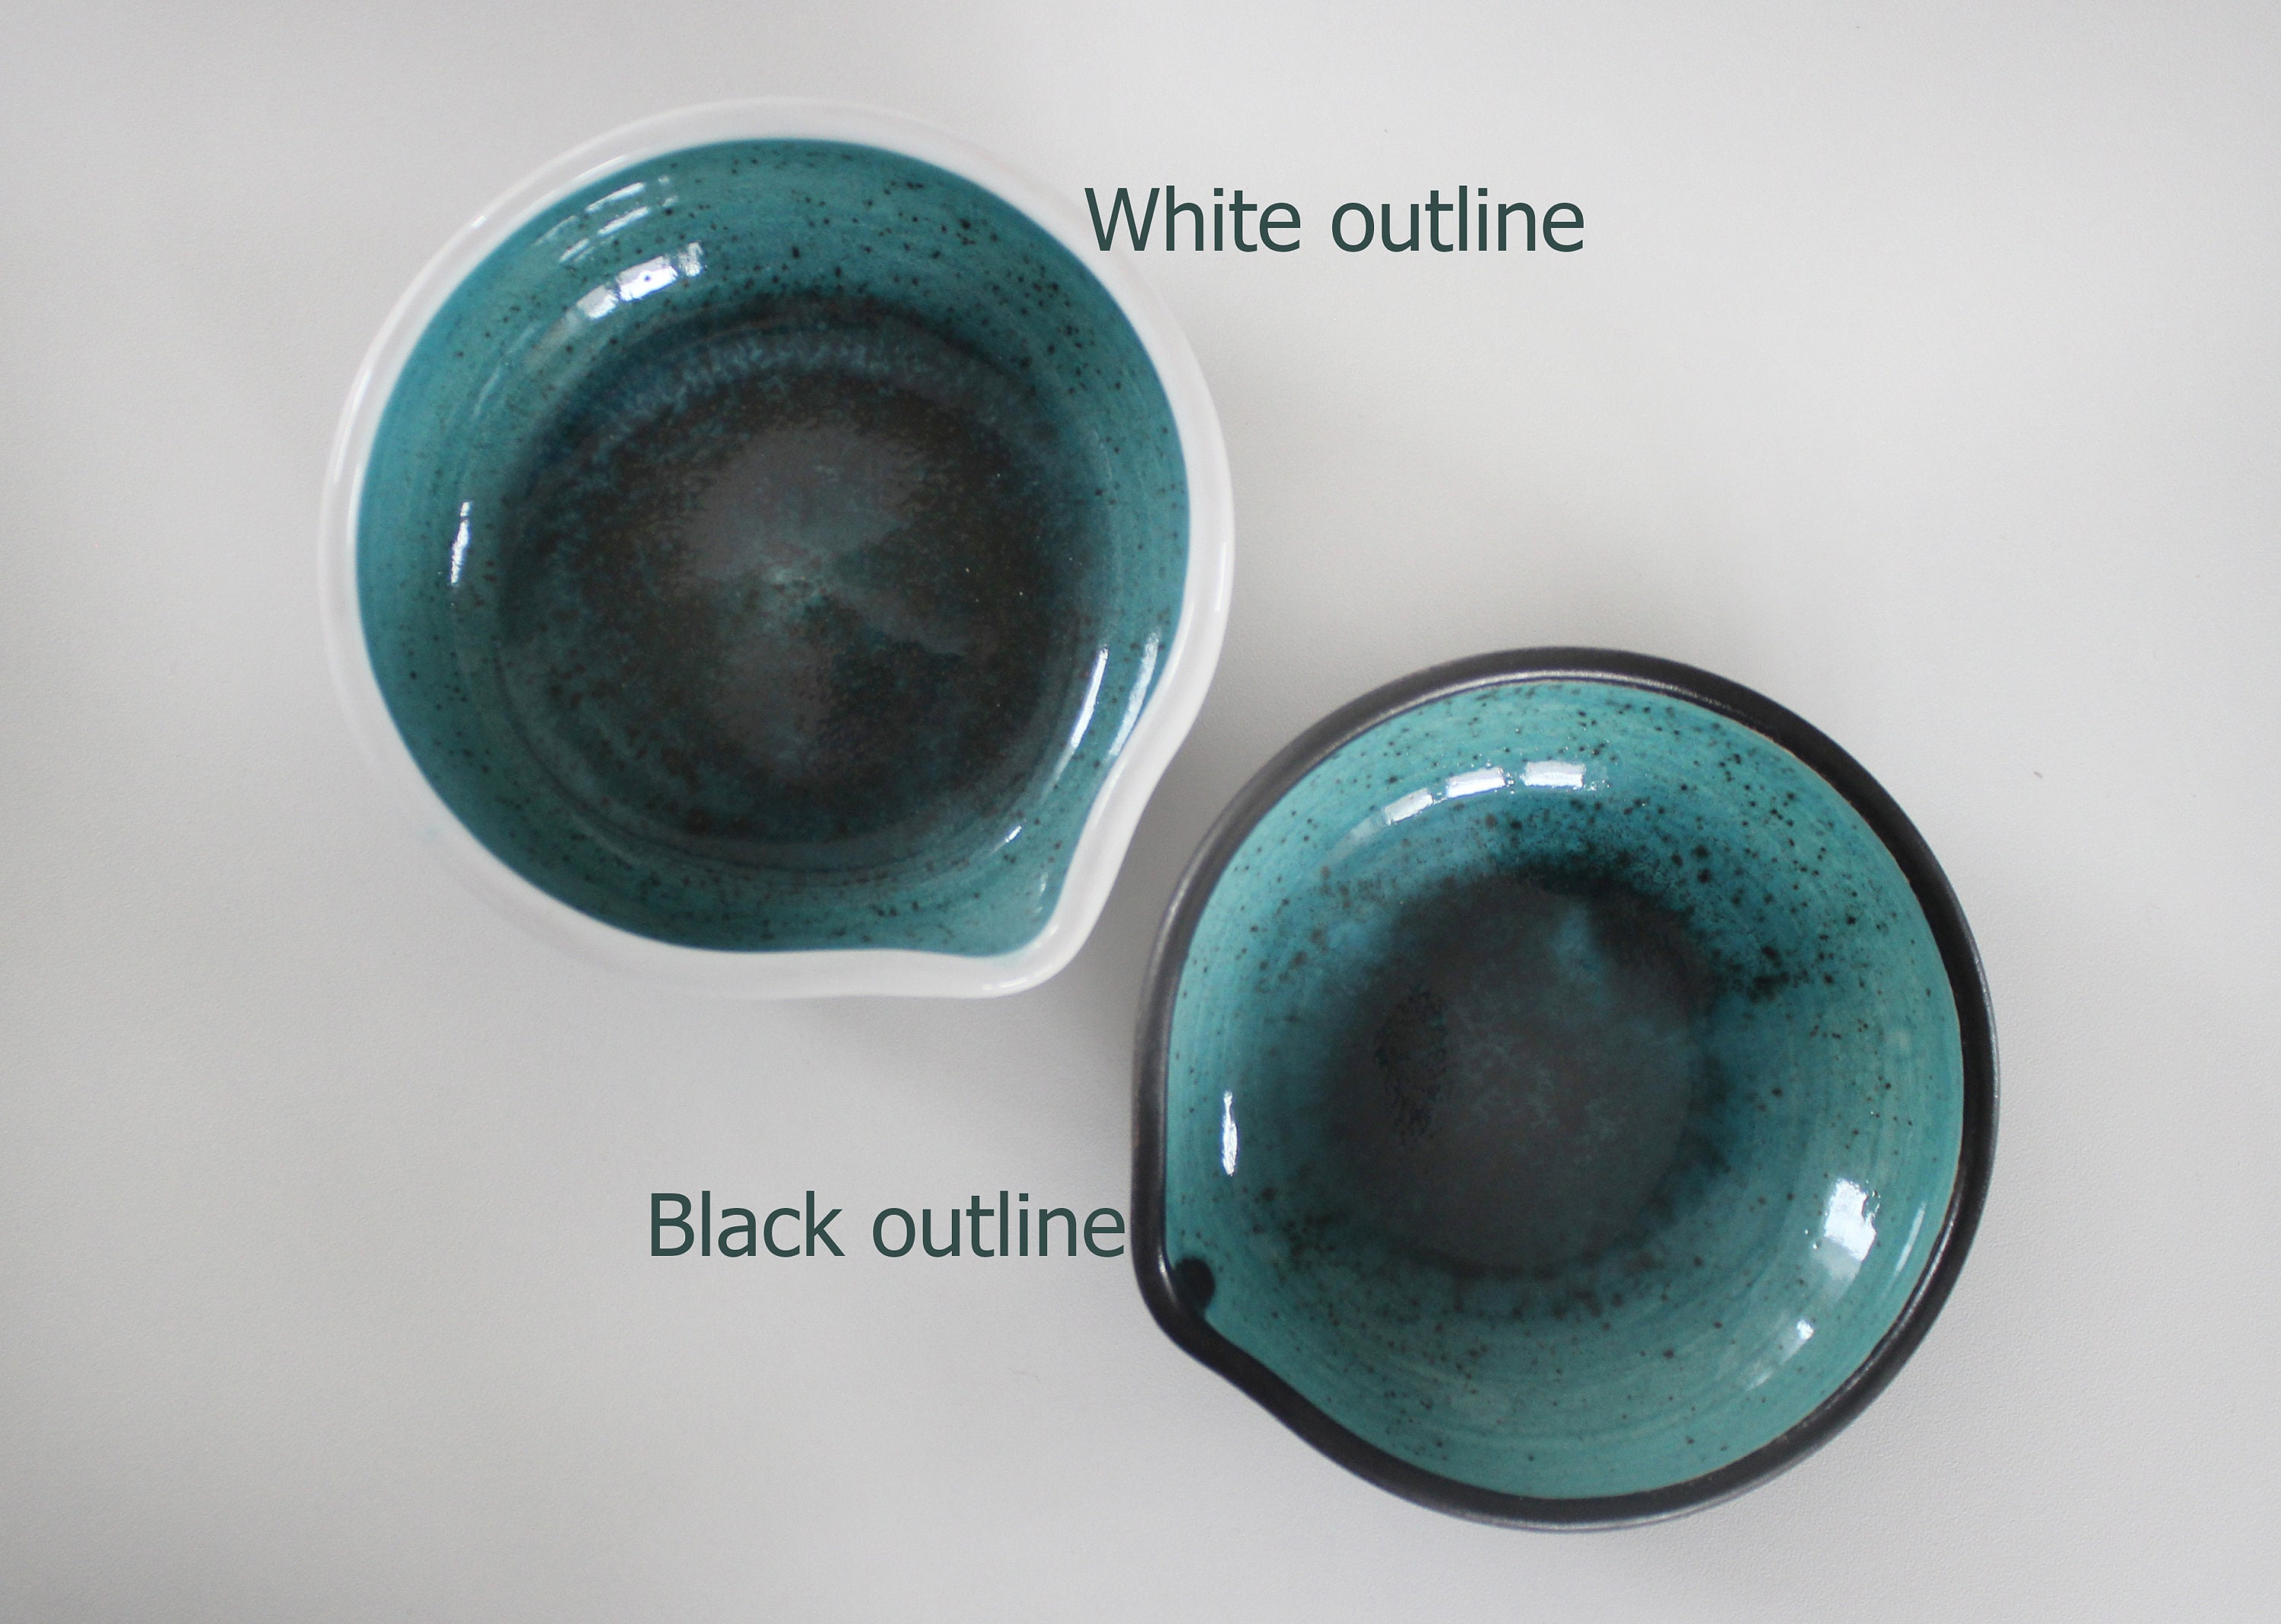 Repose cuillère turquoise - Poterie Massucco